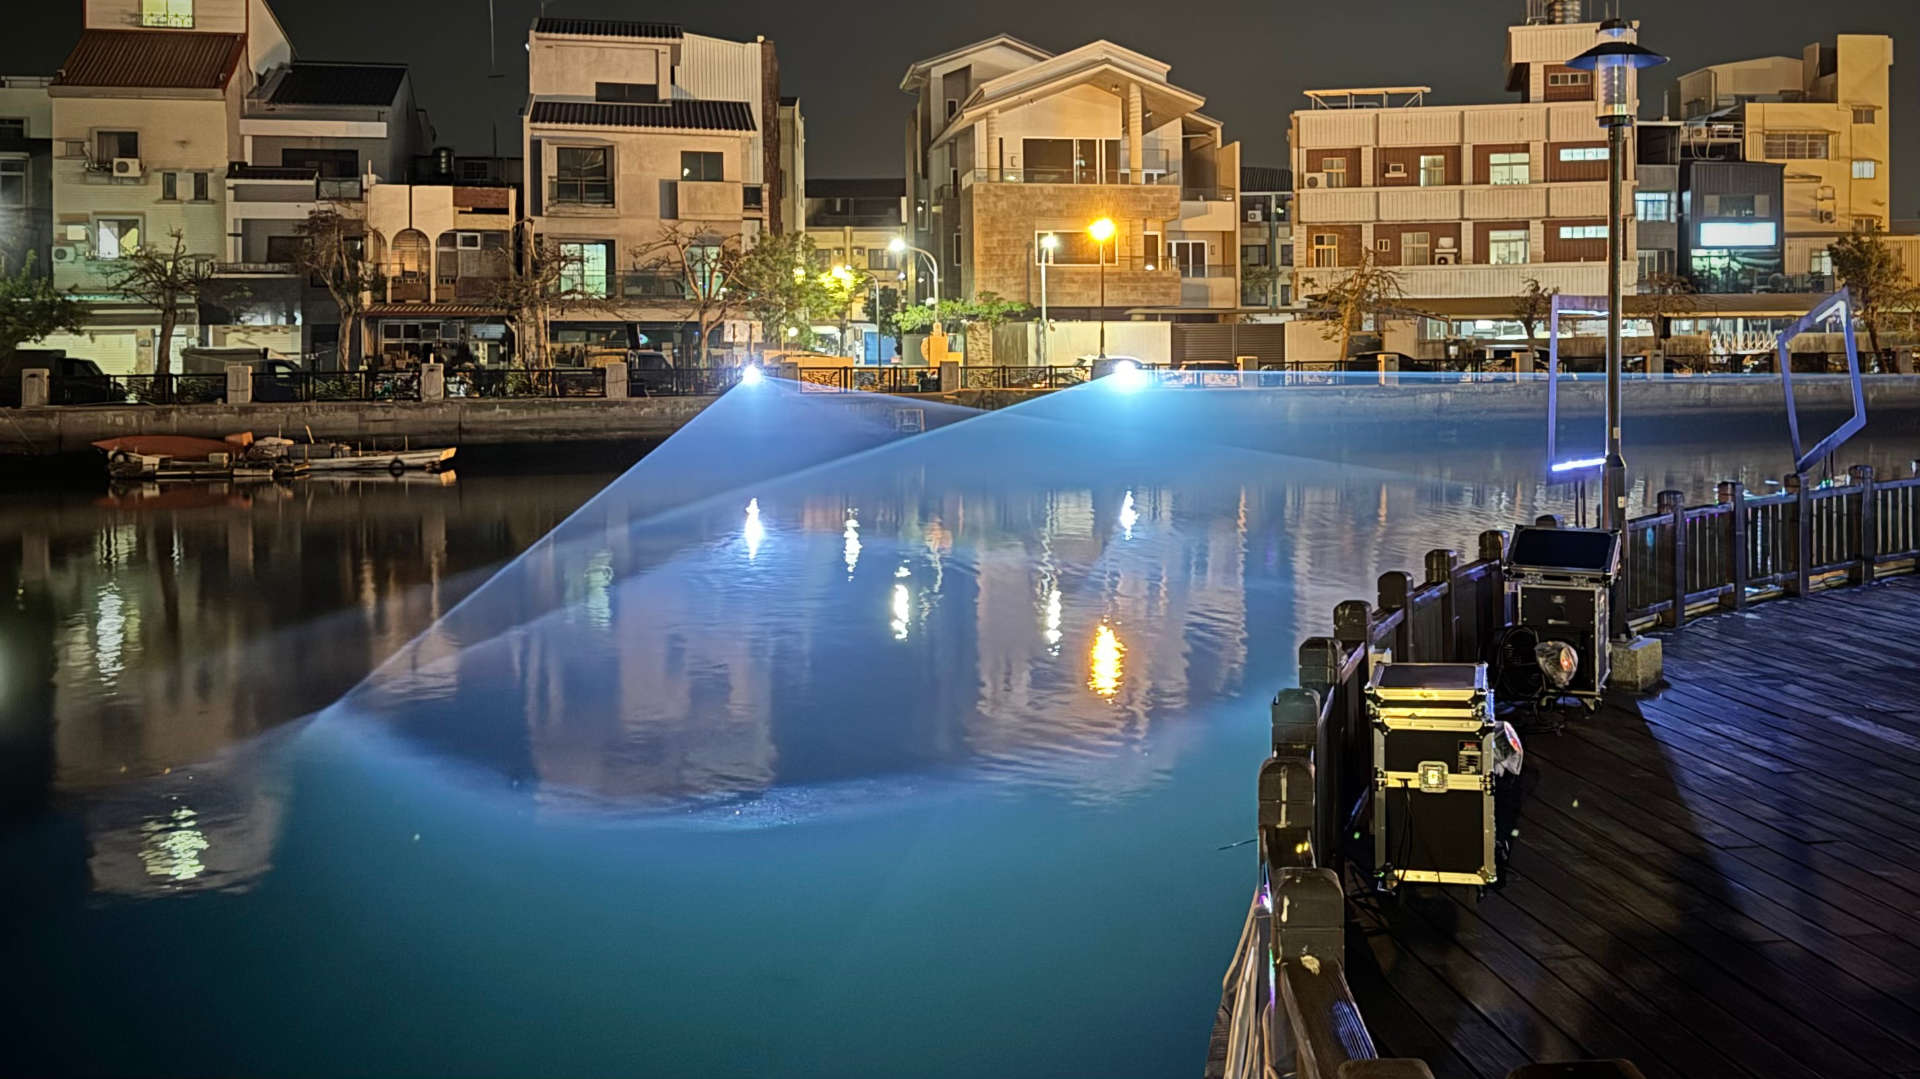 View across Tainan Canal to lazer projectors on the far side, projecting wide triangular beams of light over the water.